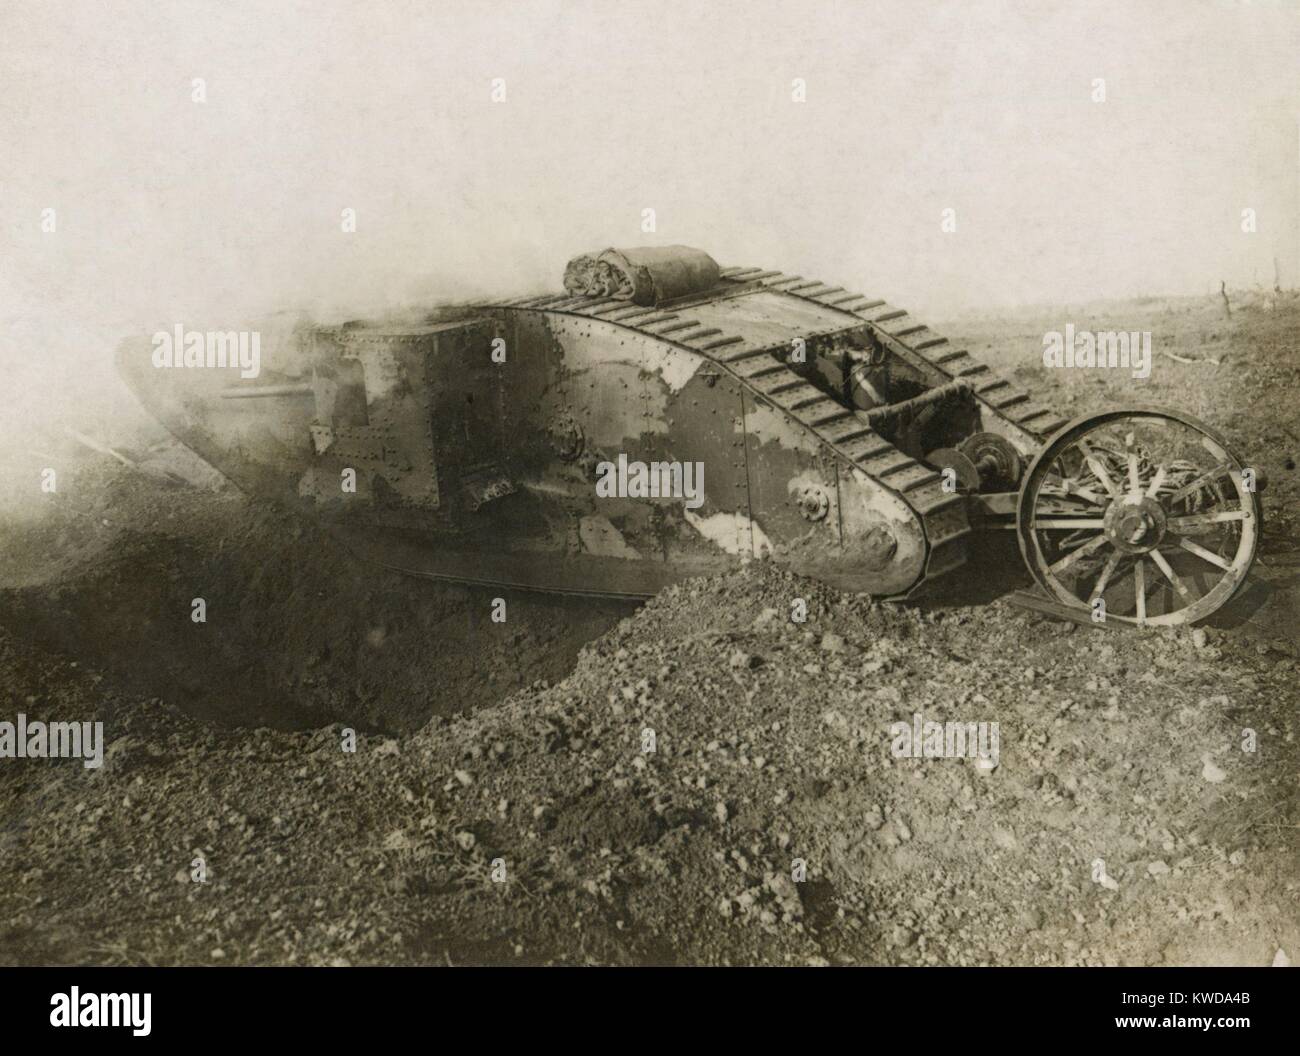 World War 1. Somme Offensive. One of the larger British tanks, the Mark I, spanning an enemy trench. The tank was introduced by the British on Sept. 15, 1916, during the Battle of Flers-Courcelette, of the Somme Offensive. (BSLOC 2013 1 153) Stock Photo